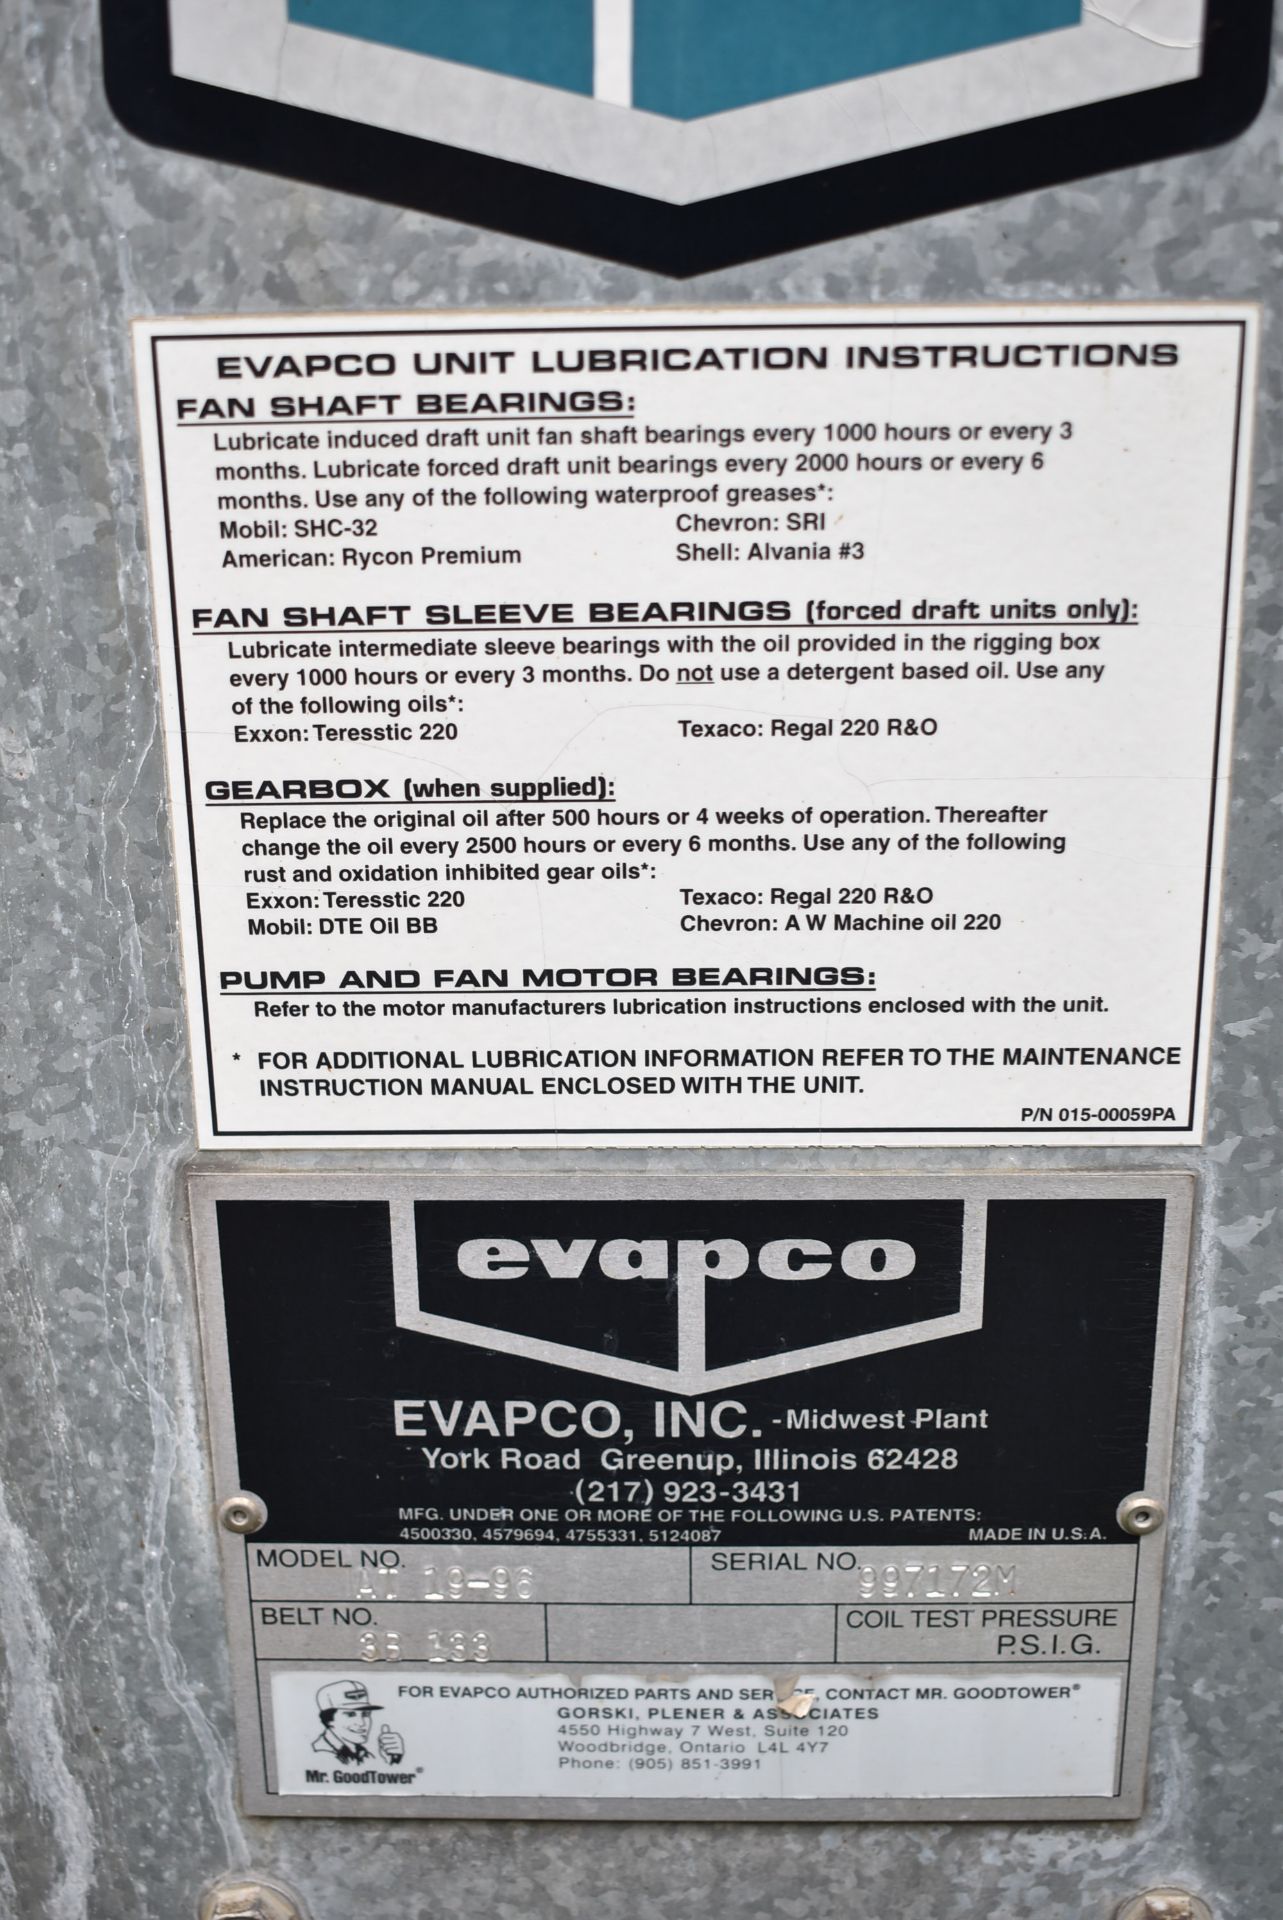 EVAPCO AT 19-96 COOLING TOWER WITH 15HP FAN MOTOR, 480GPM WATER CAPACITY, AND - Image 3 of 7